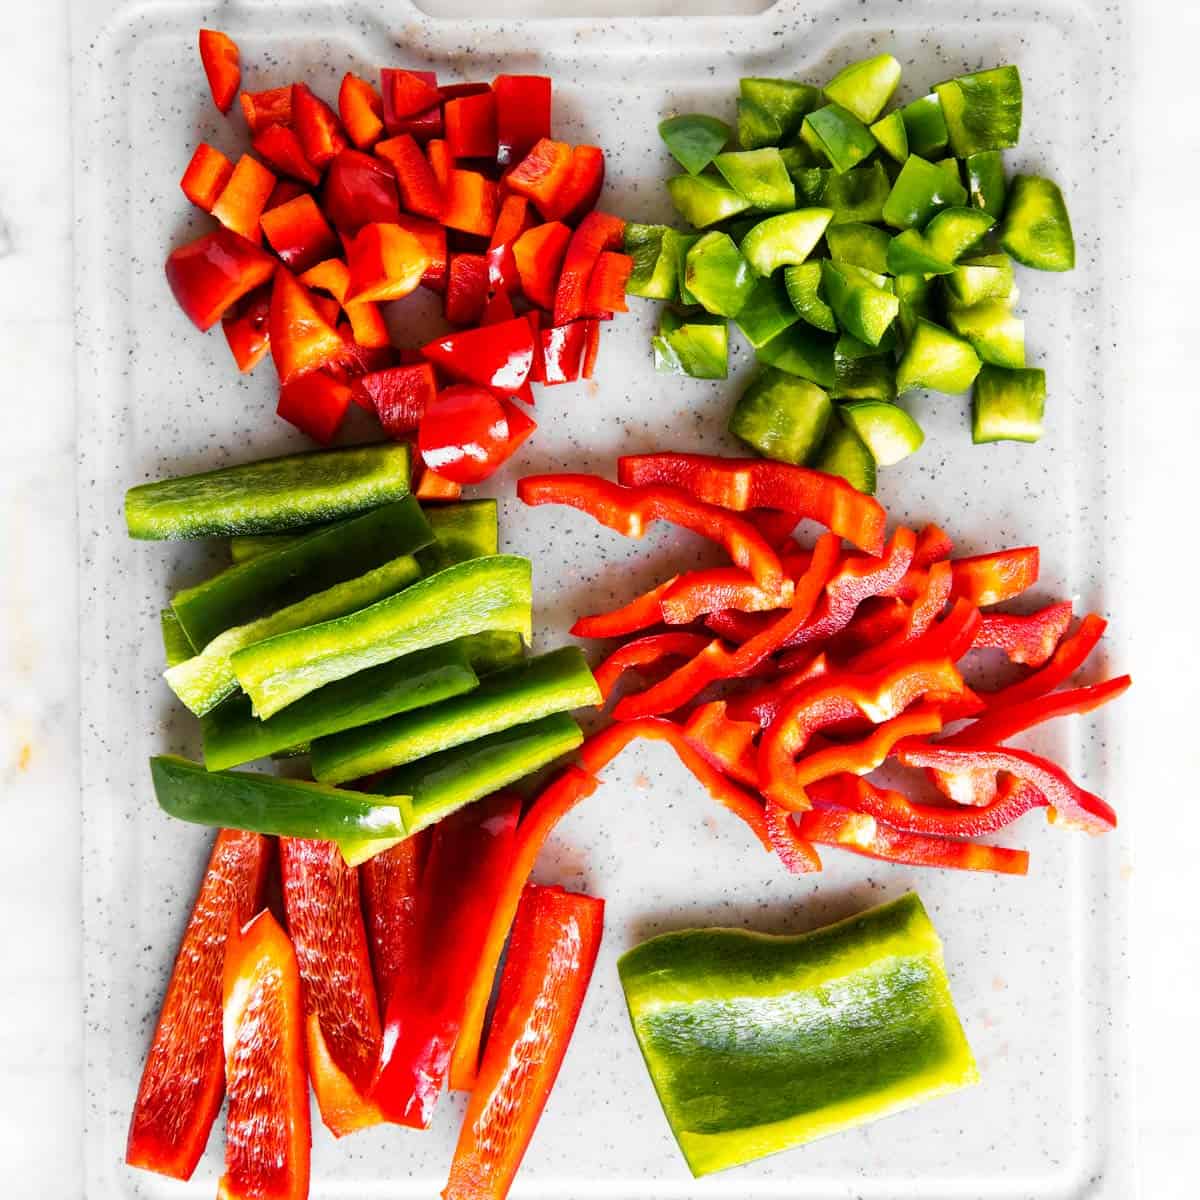 https://www.savorynothings.com/wp-content/uploads/2021/04/how-to-cut-a-bell-pepper-image-sq.jpg